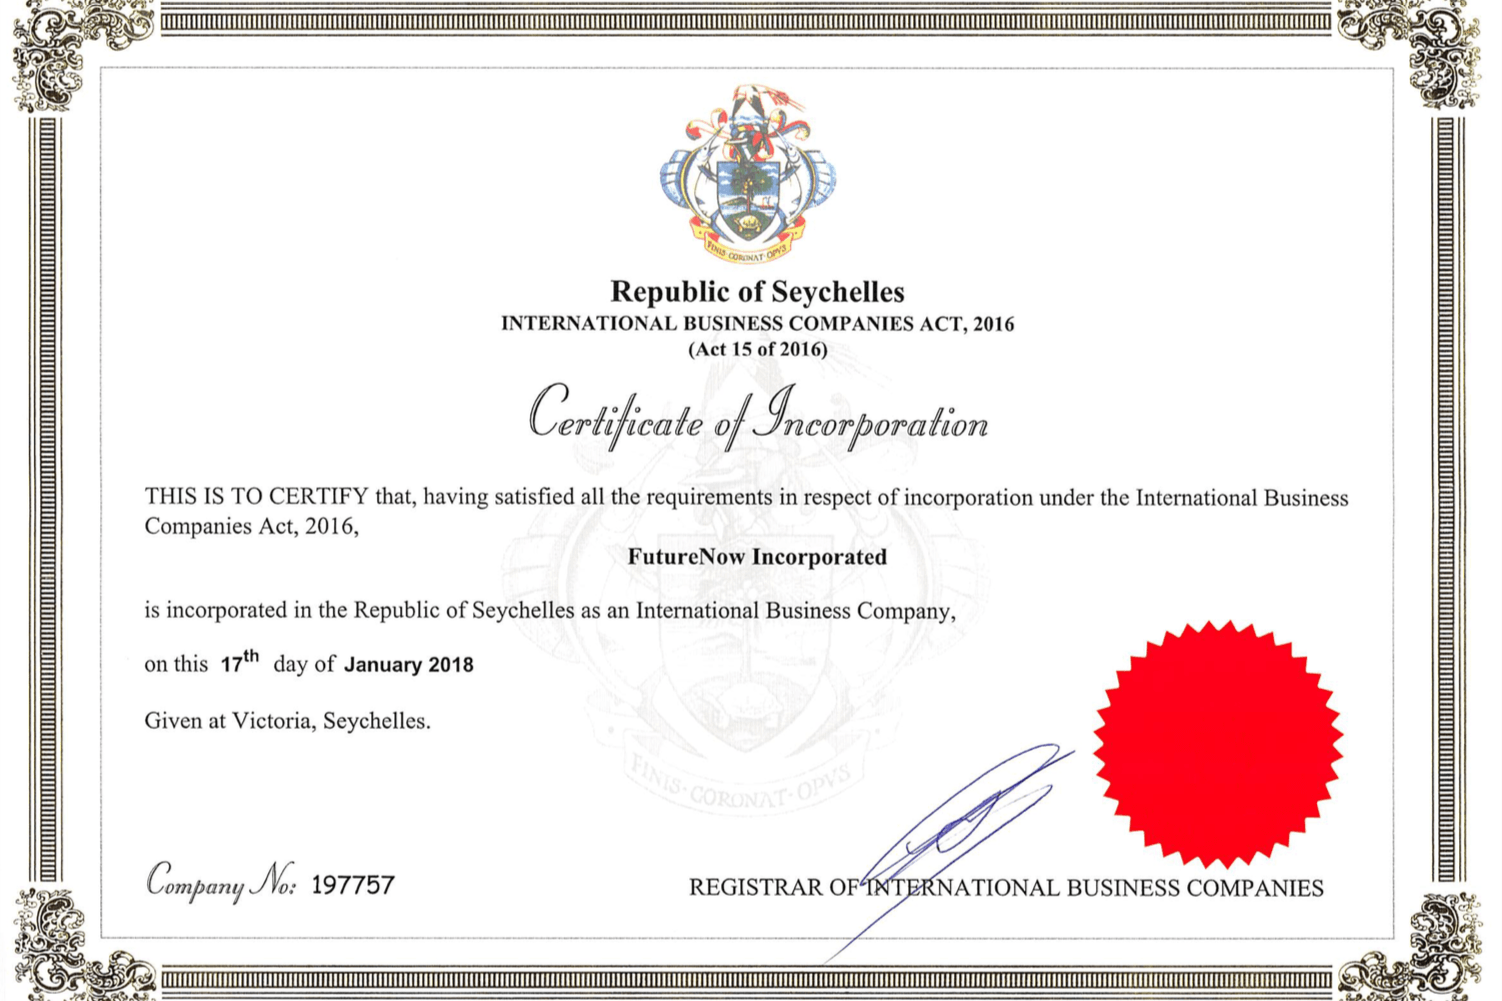 certificate of incorporation first LDAO, Legal DAO